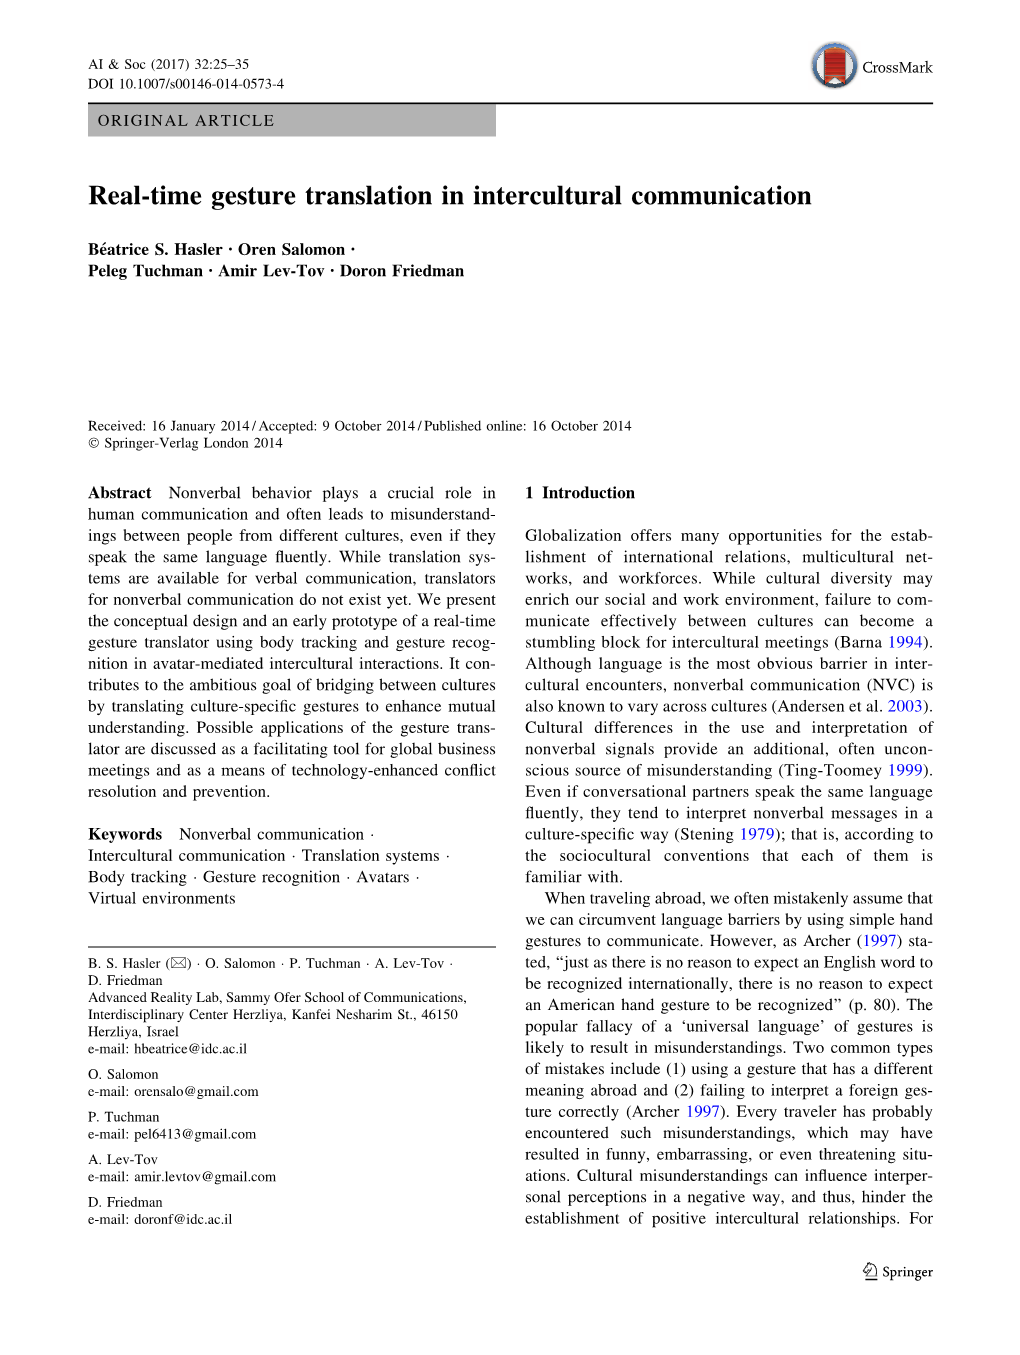 Real-Time Gesture Translation in Intercultural Communication